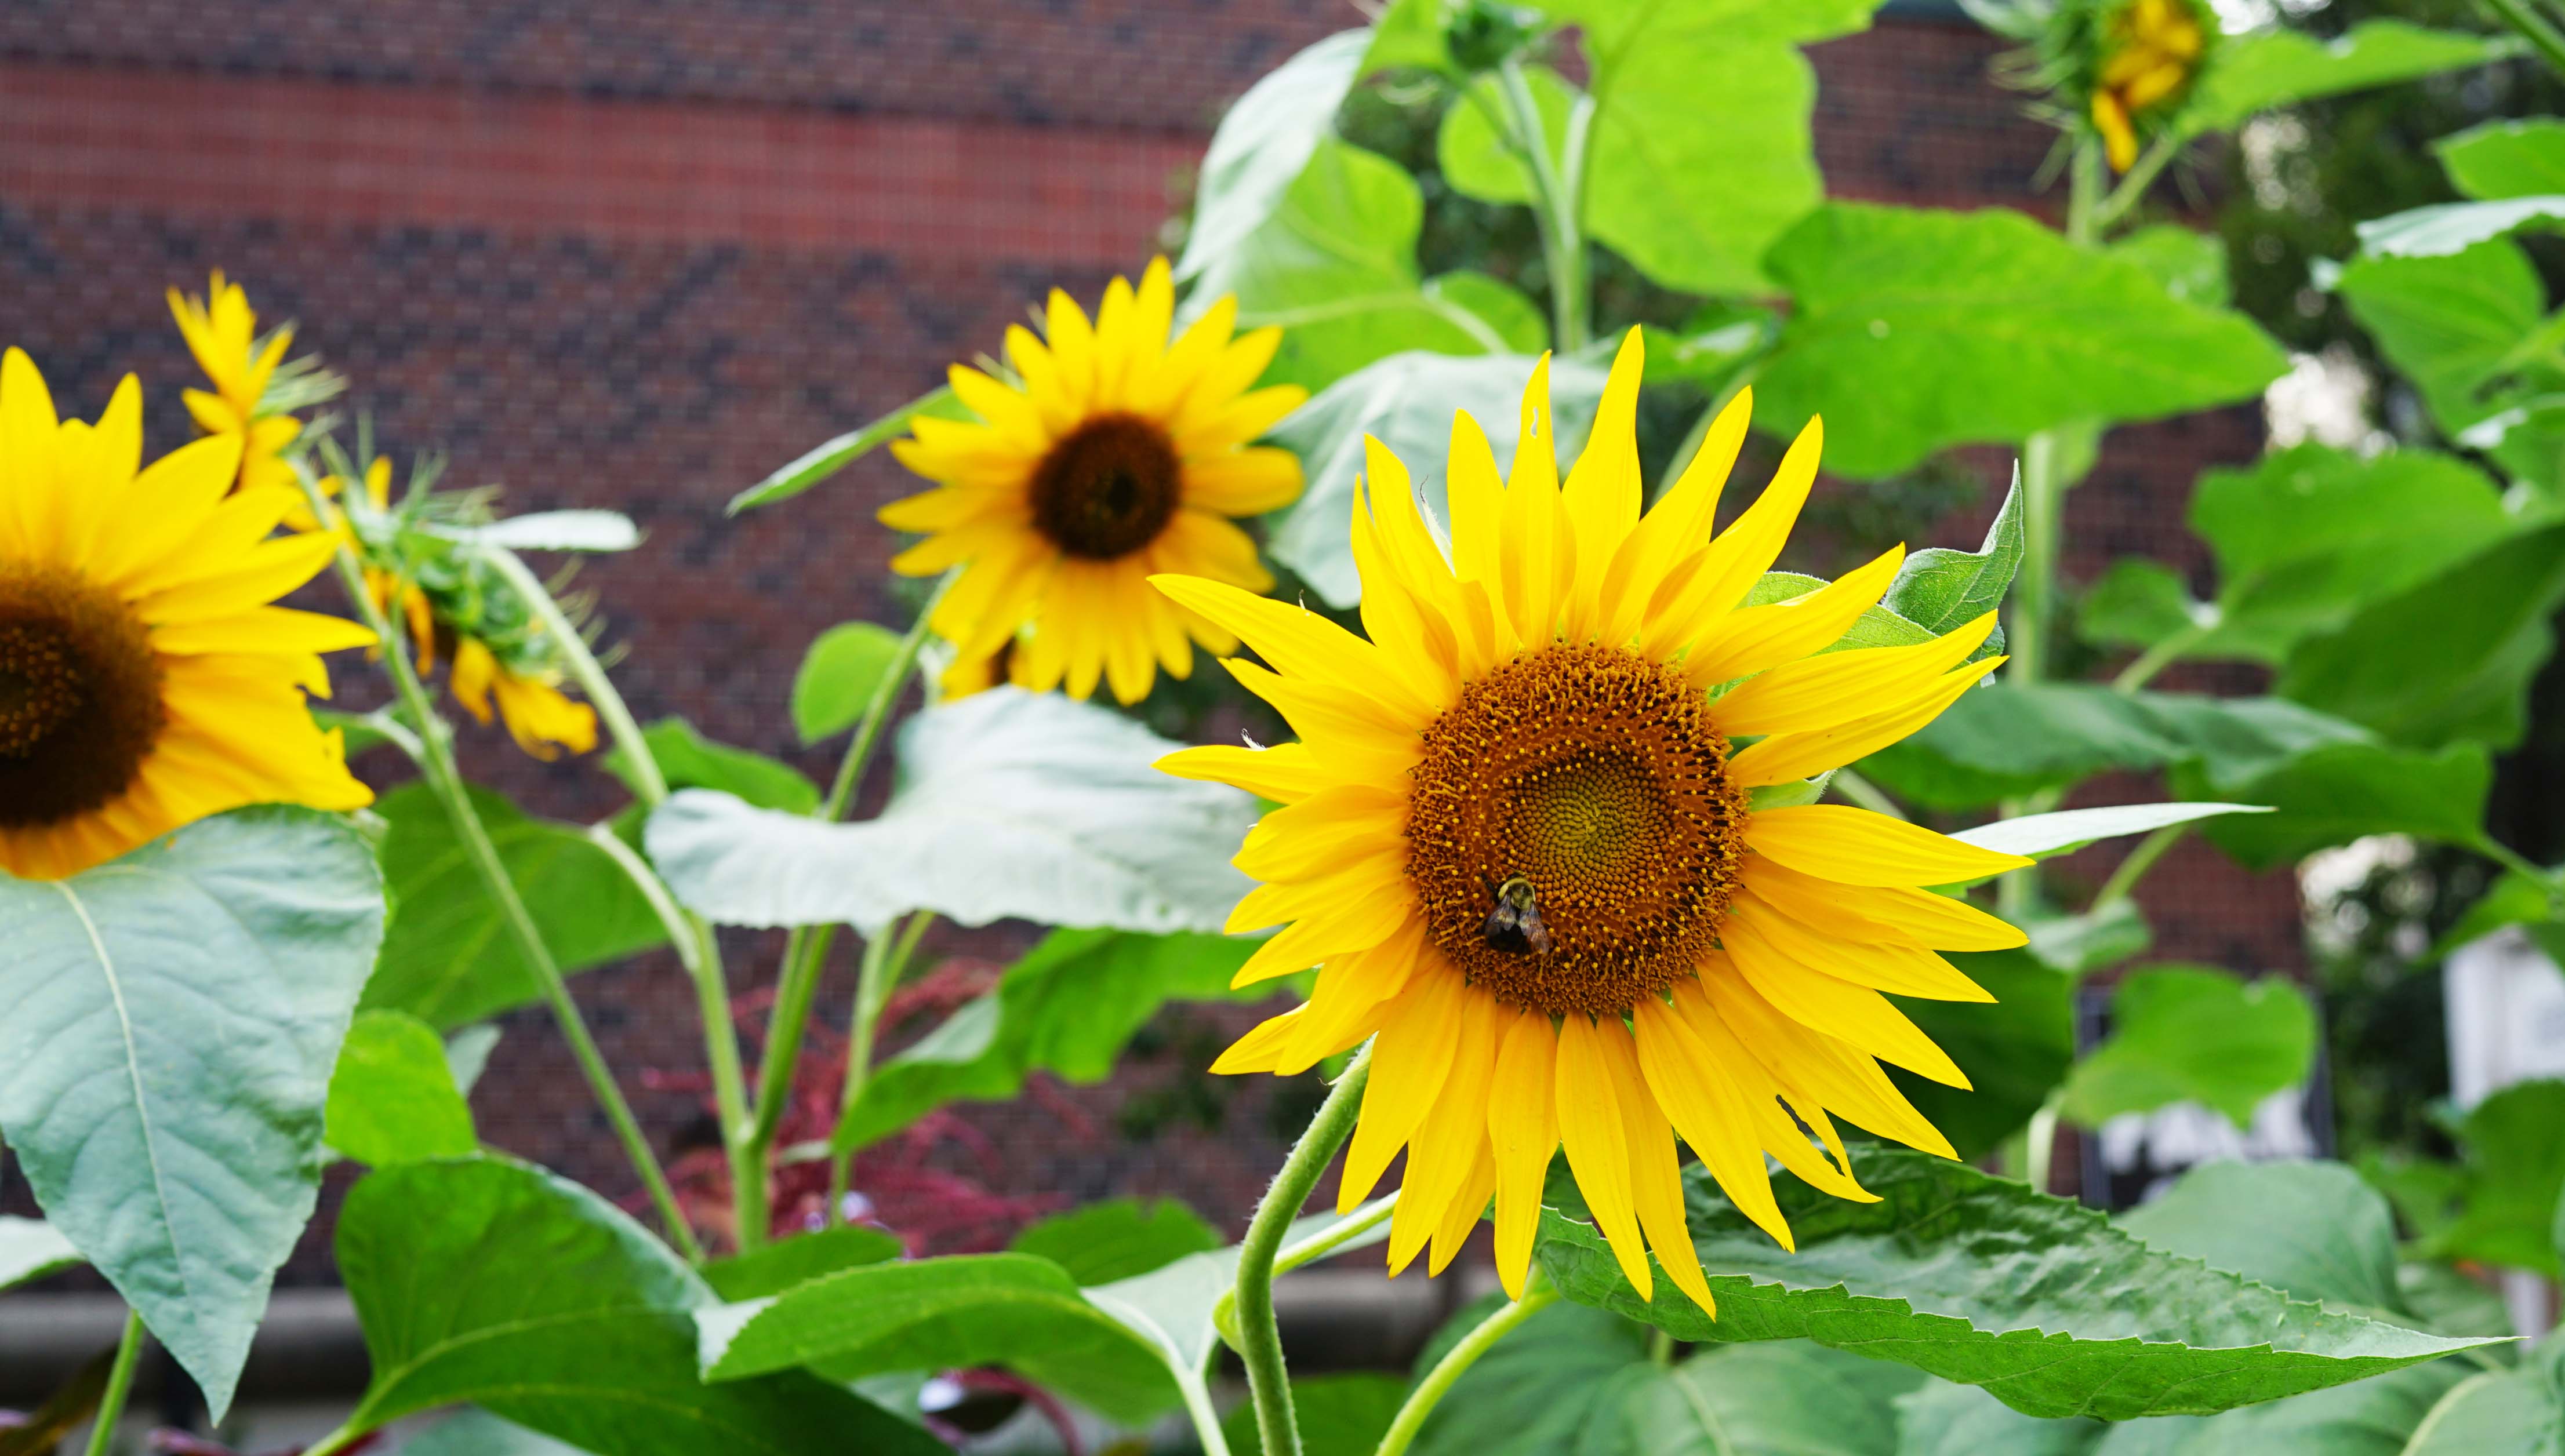 bumble bee and sunflower 8-19-2015